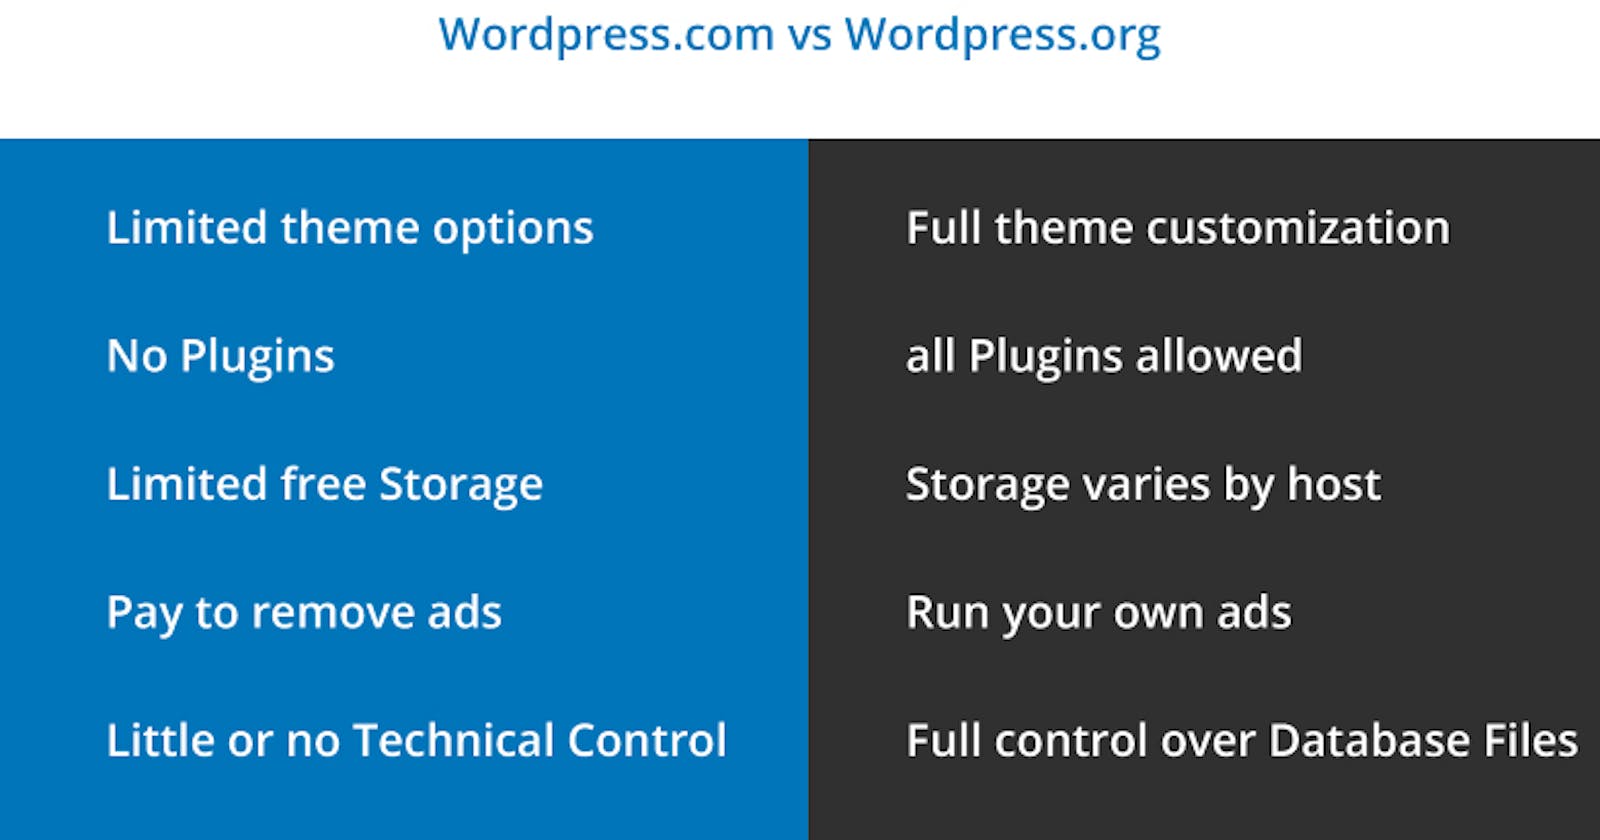 What is the difference between wordpress.com vs wordpress.org